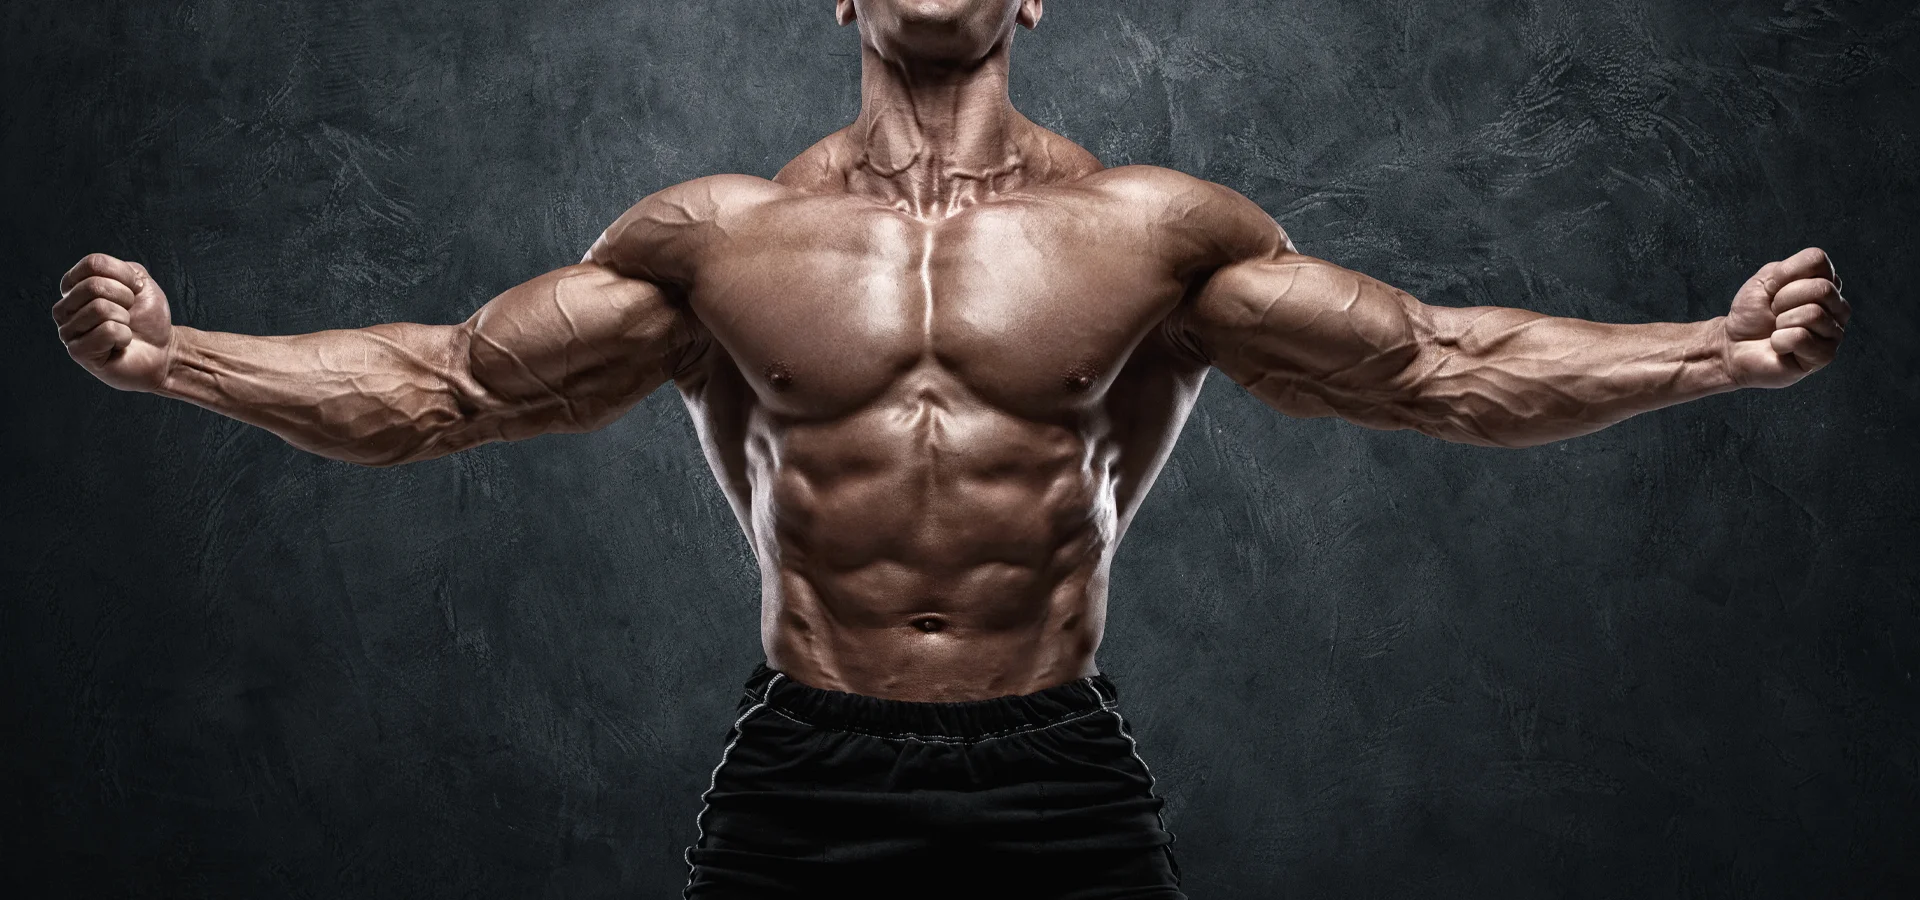 Testosterone cypionate - What is it?